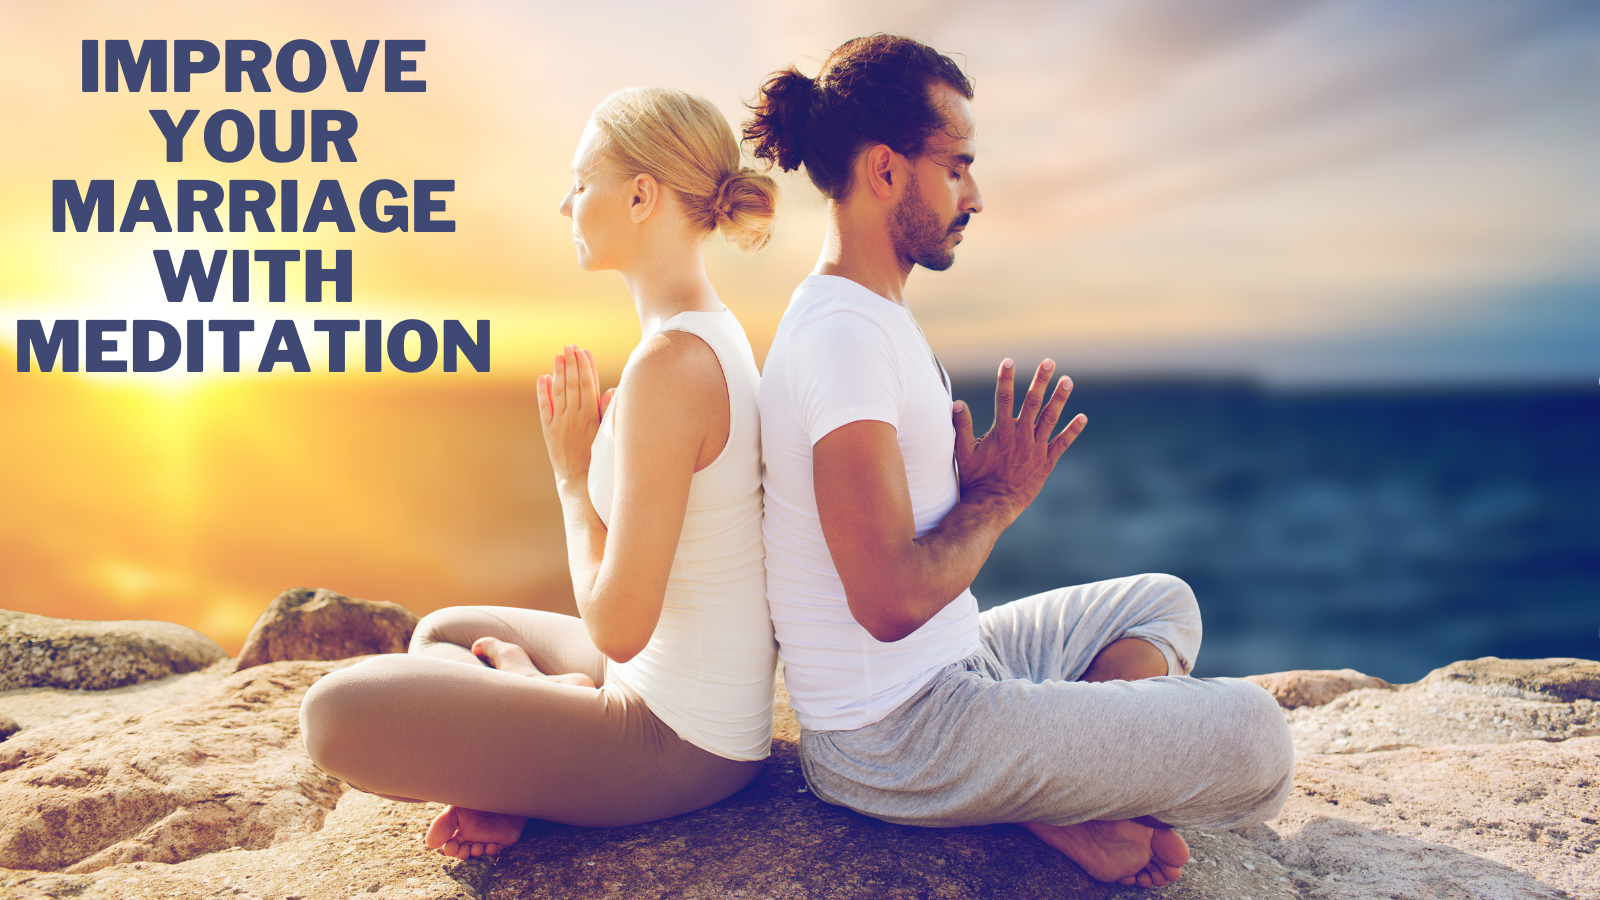 Tips To Improve Your Marriage With Meditation